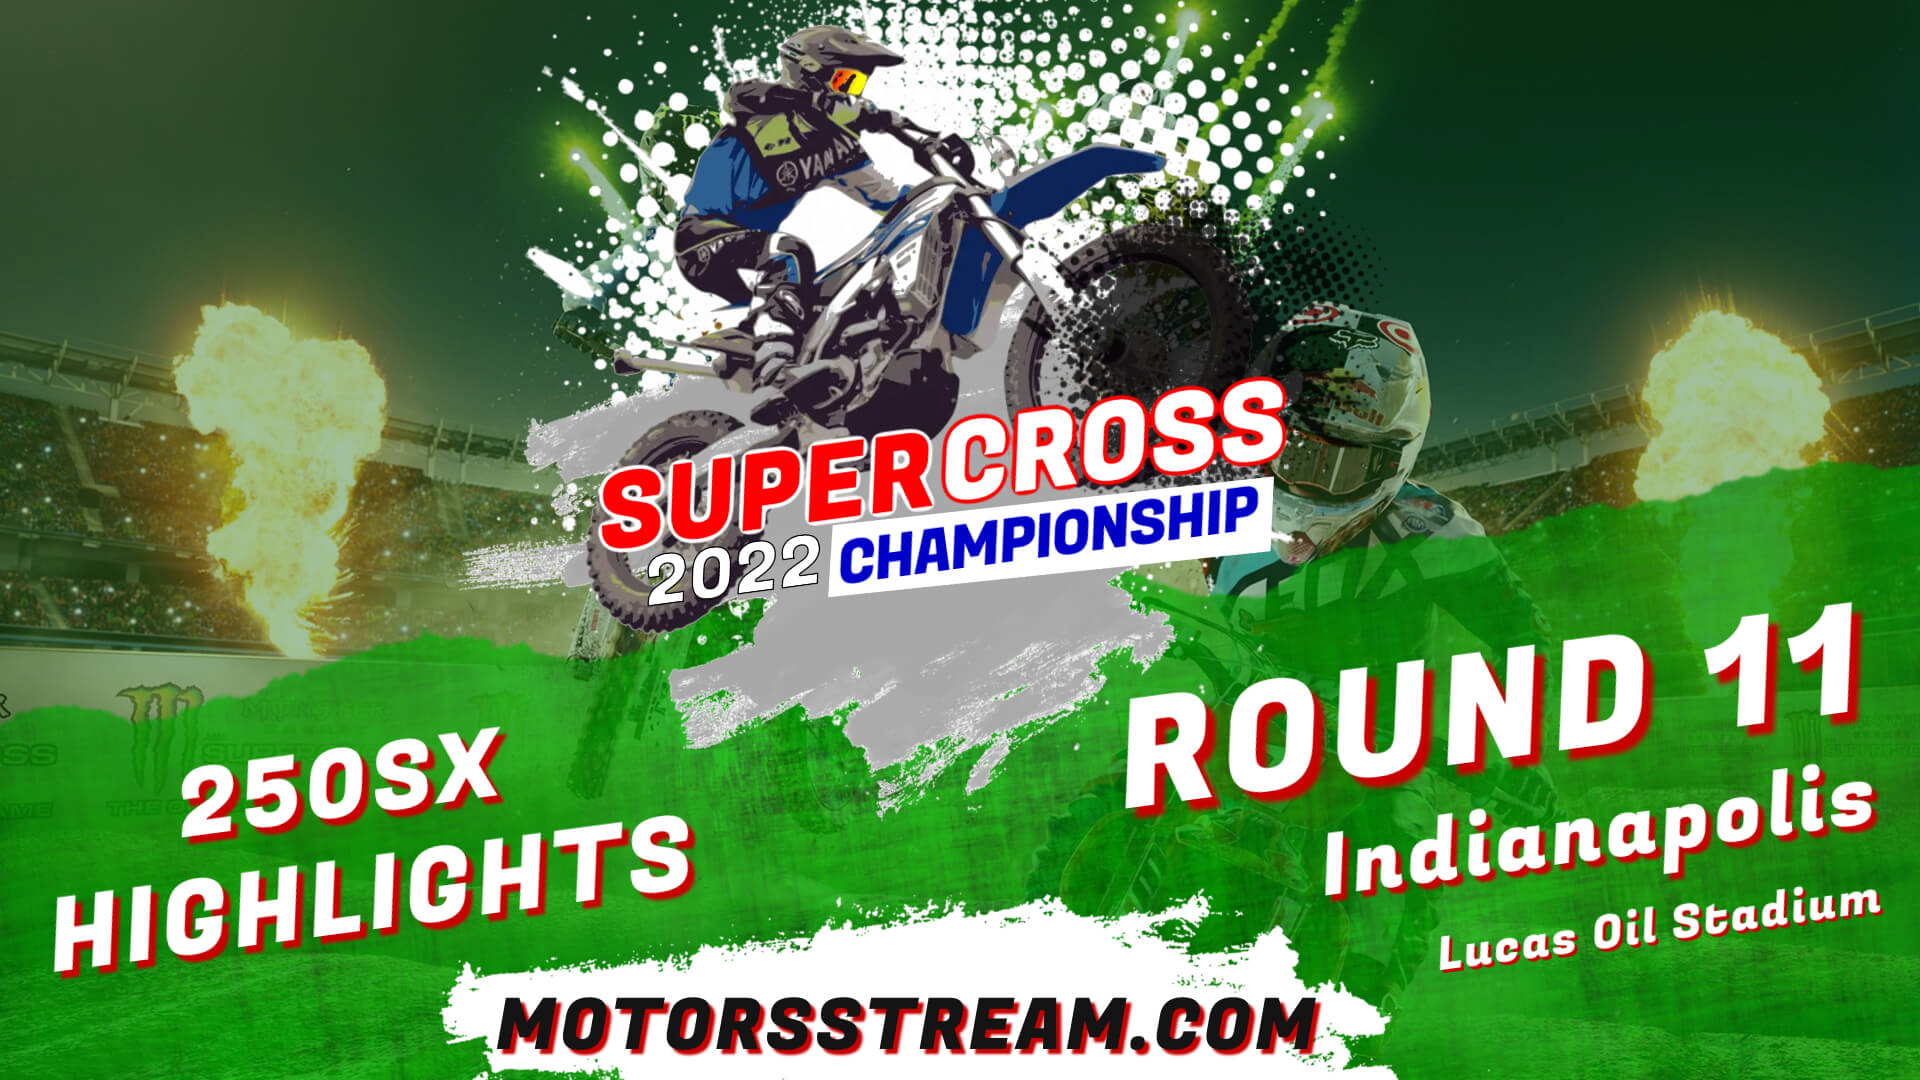 Supercross Round 11 Indianapolis 250SX Highlights 2022